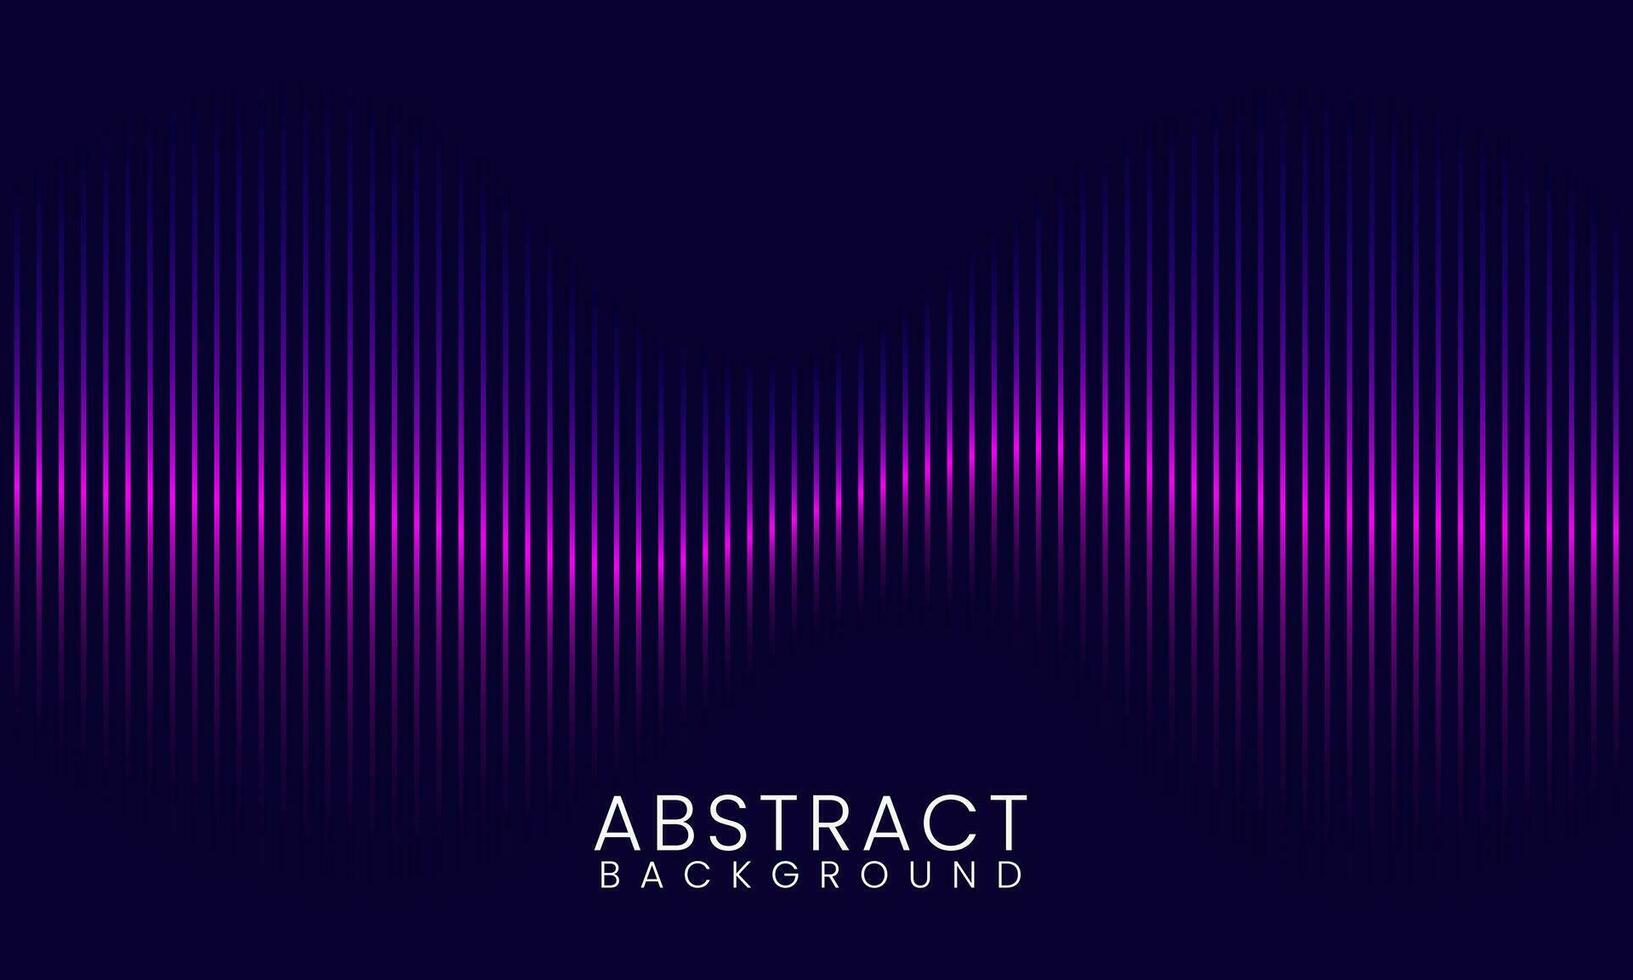 Neon audio voice frequency wave and abstract sound light vector background,  Radio pulse effect curve design, Volume music track line